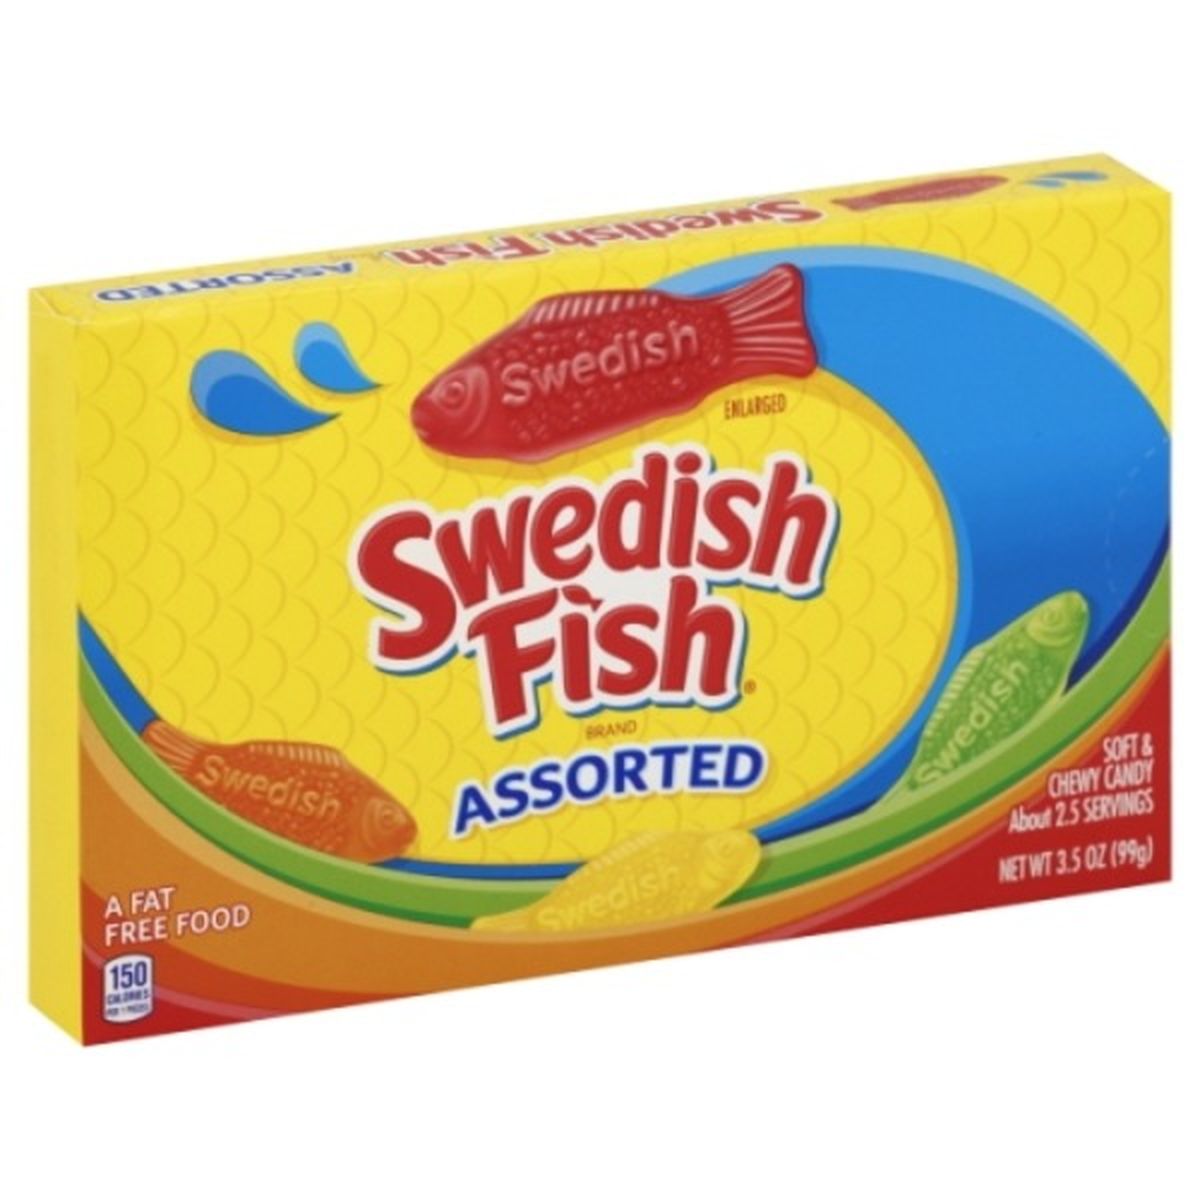 Calories in Swedish Fish Candy, Soft & Chewy, Assorted